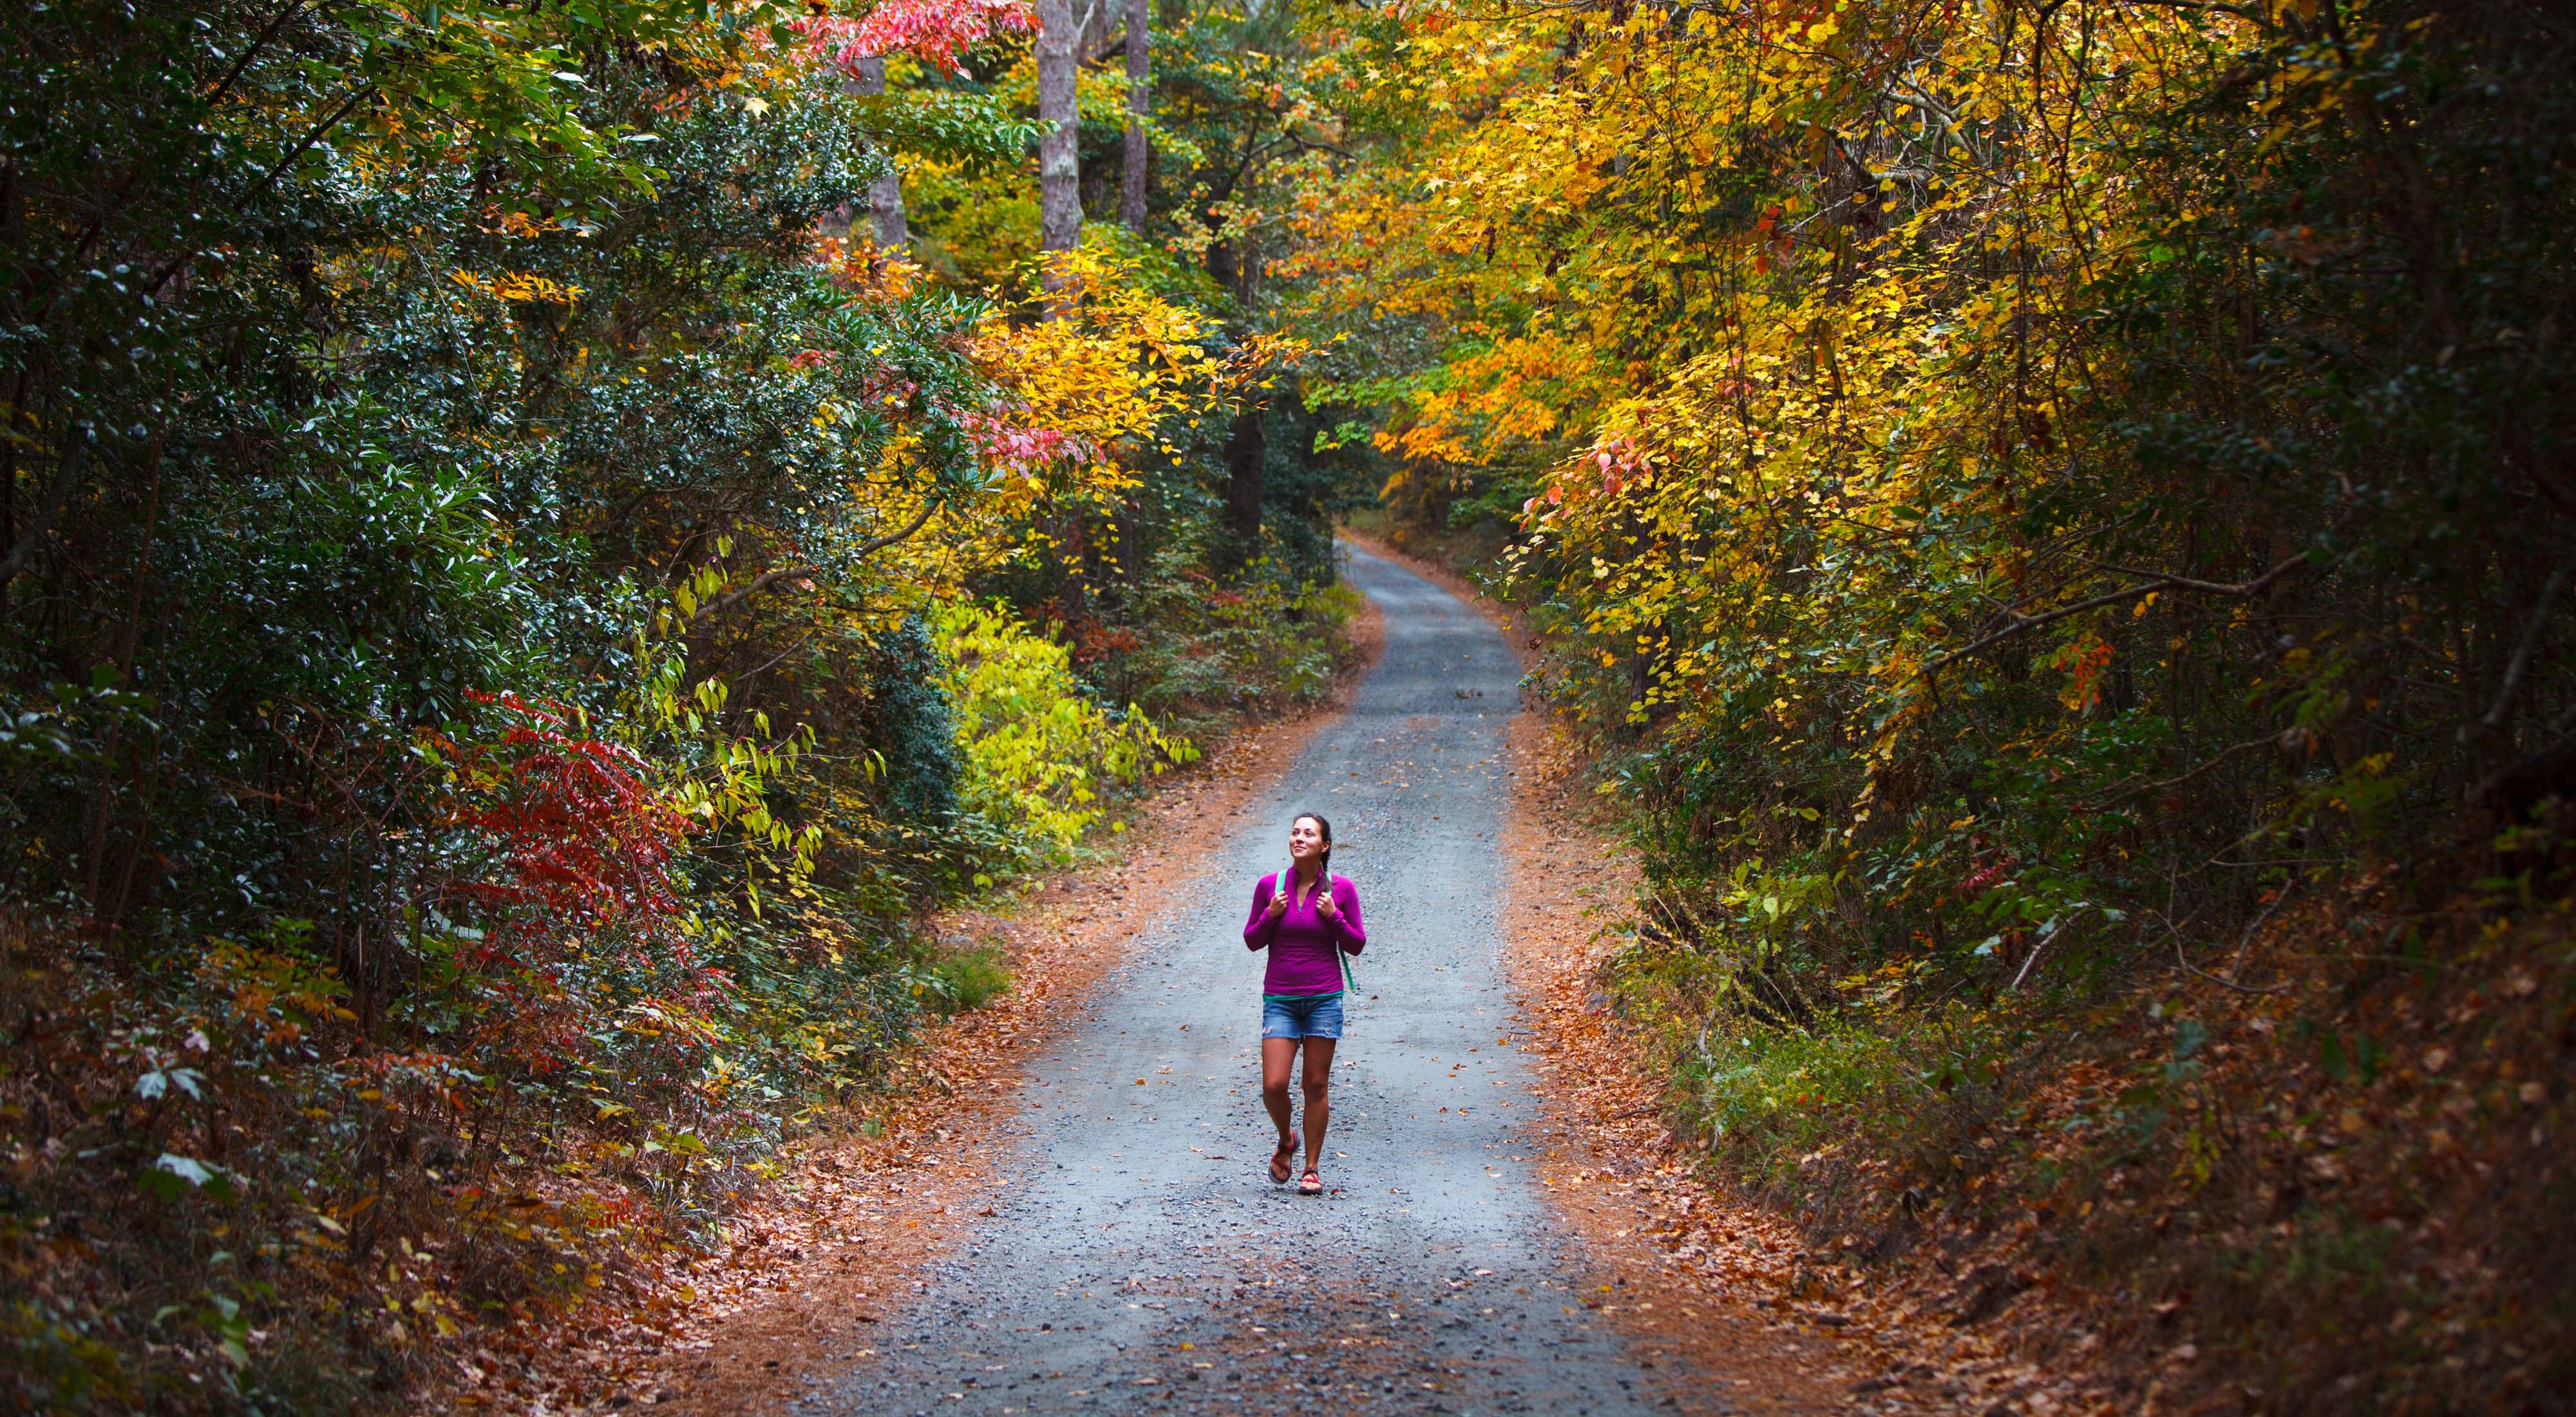 A hiker walks down a wide gravel road towards the camera with trees showing fall colors on either side.